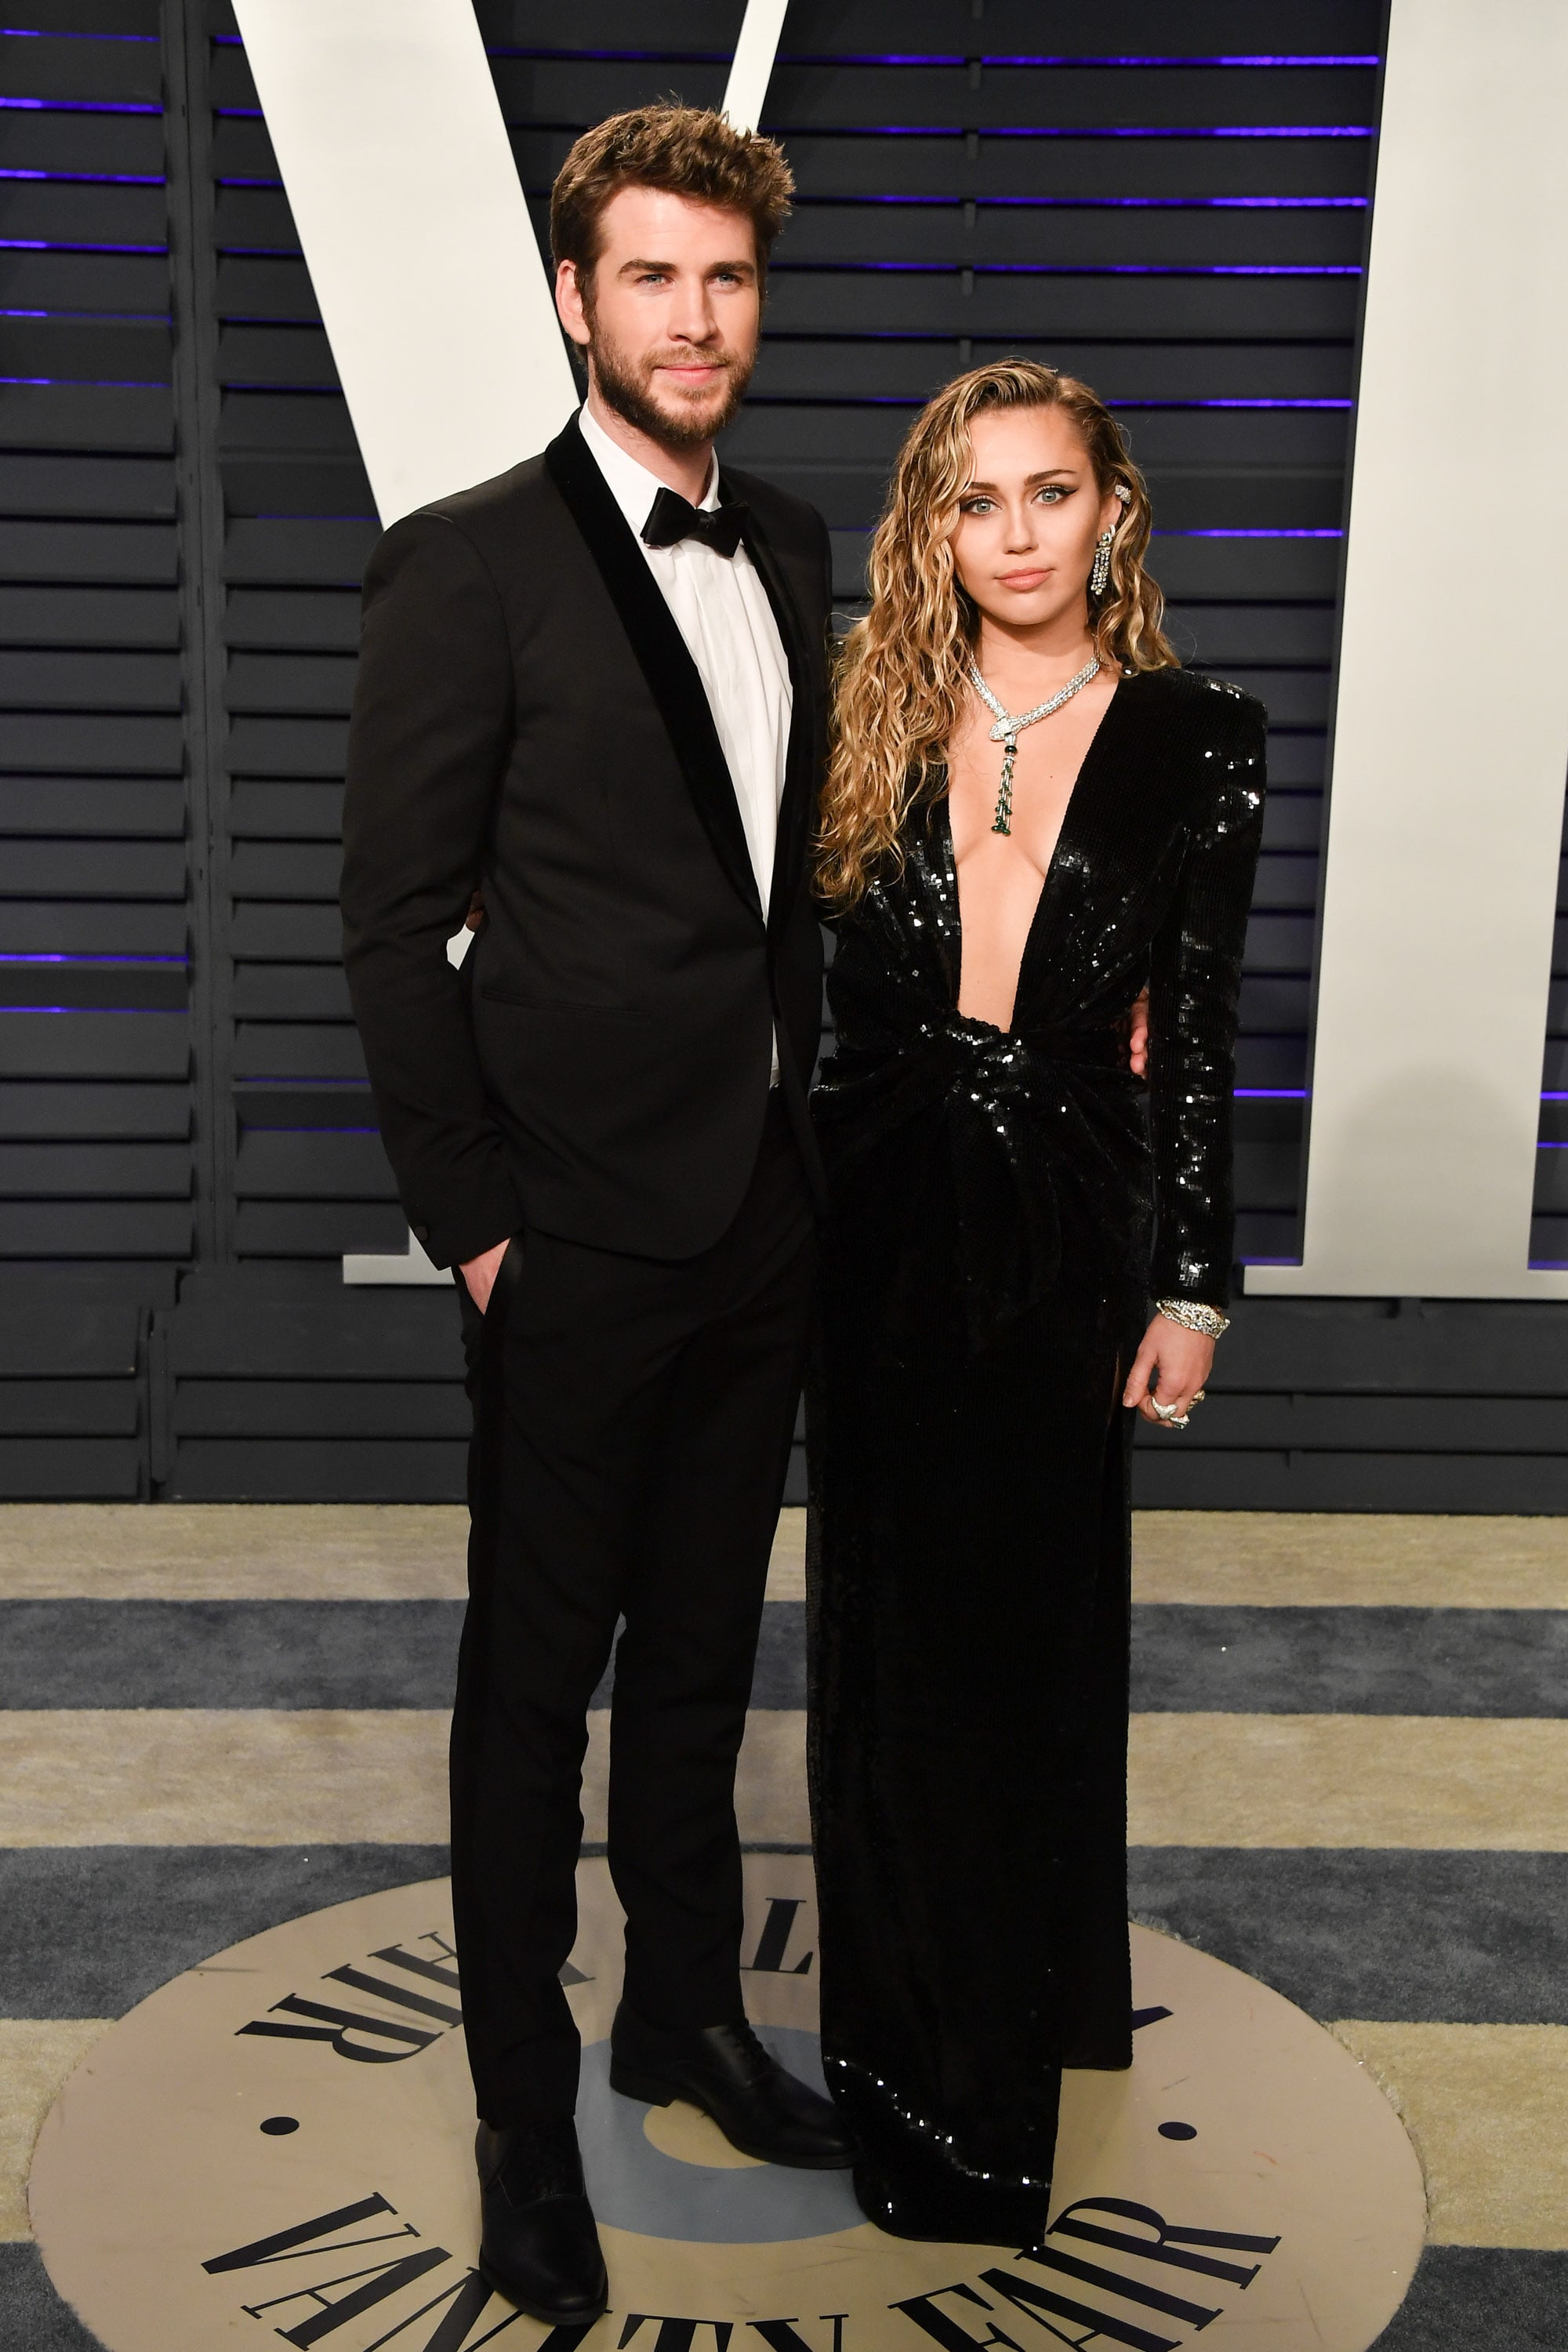 BEVERLY HILLS, CALIFORNIA - FEBRUARY 24: Liam Hemsworth and Miley Cyrus attend the 2019 Vanity Fair Oscar Party hosted by Radhika Jones at Wallis Annenberg Center for the Performing Arts on February 24, 2019 in Beverly Hills, California. (Photo by George Pimentel/Getty Images)